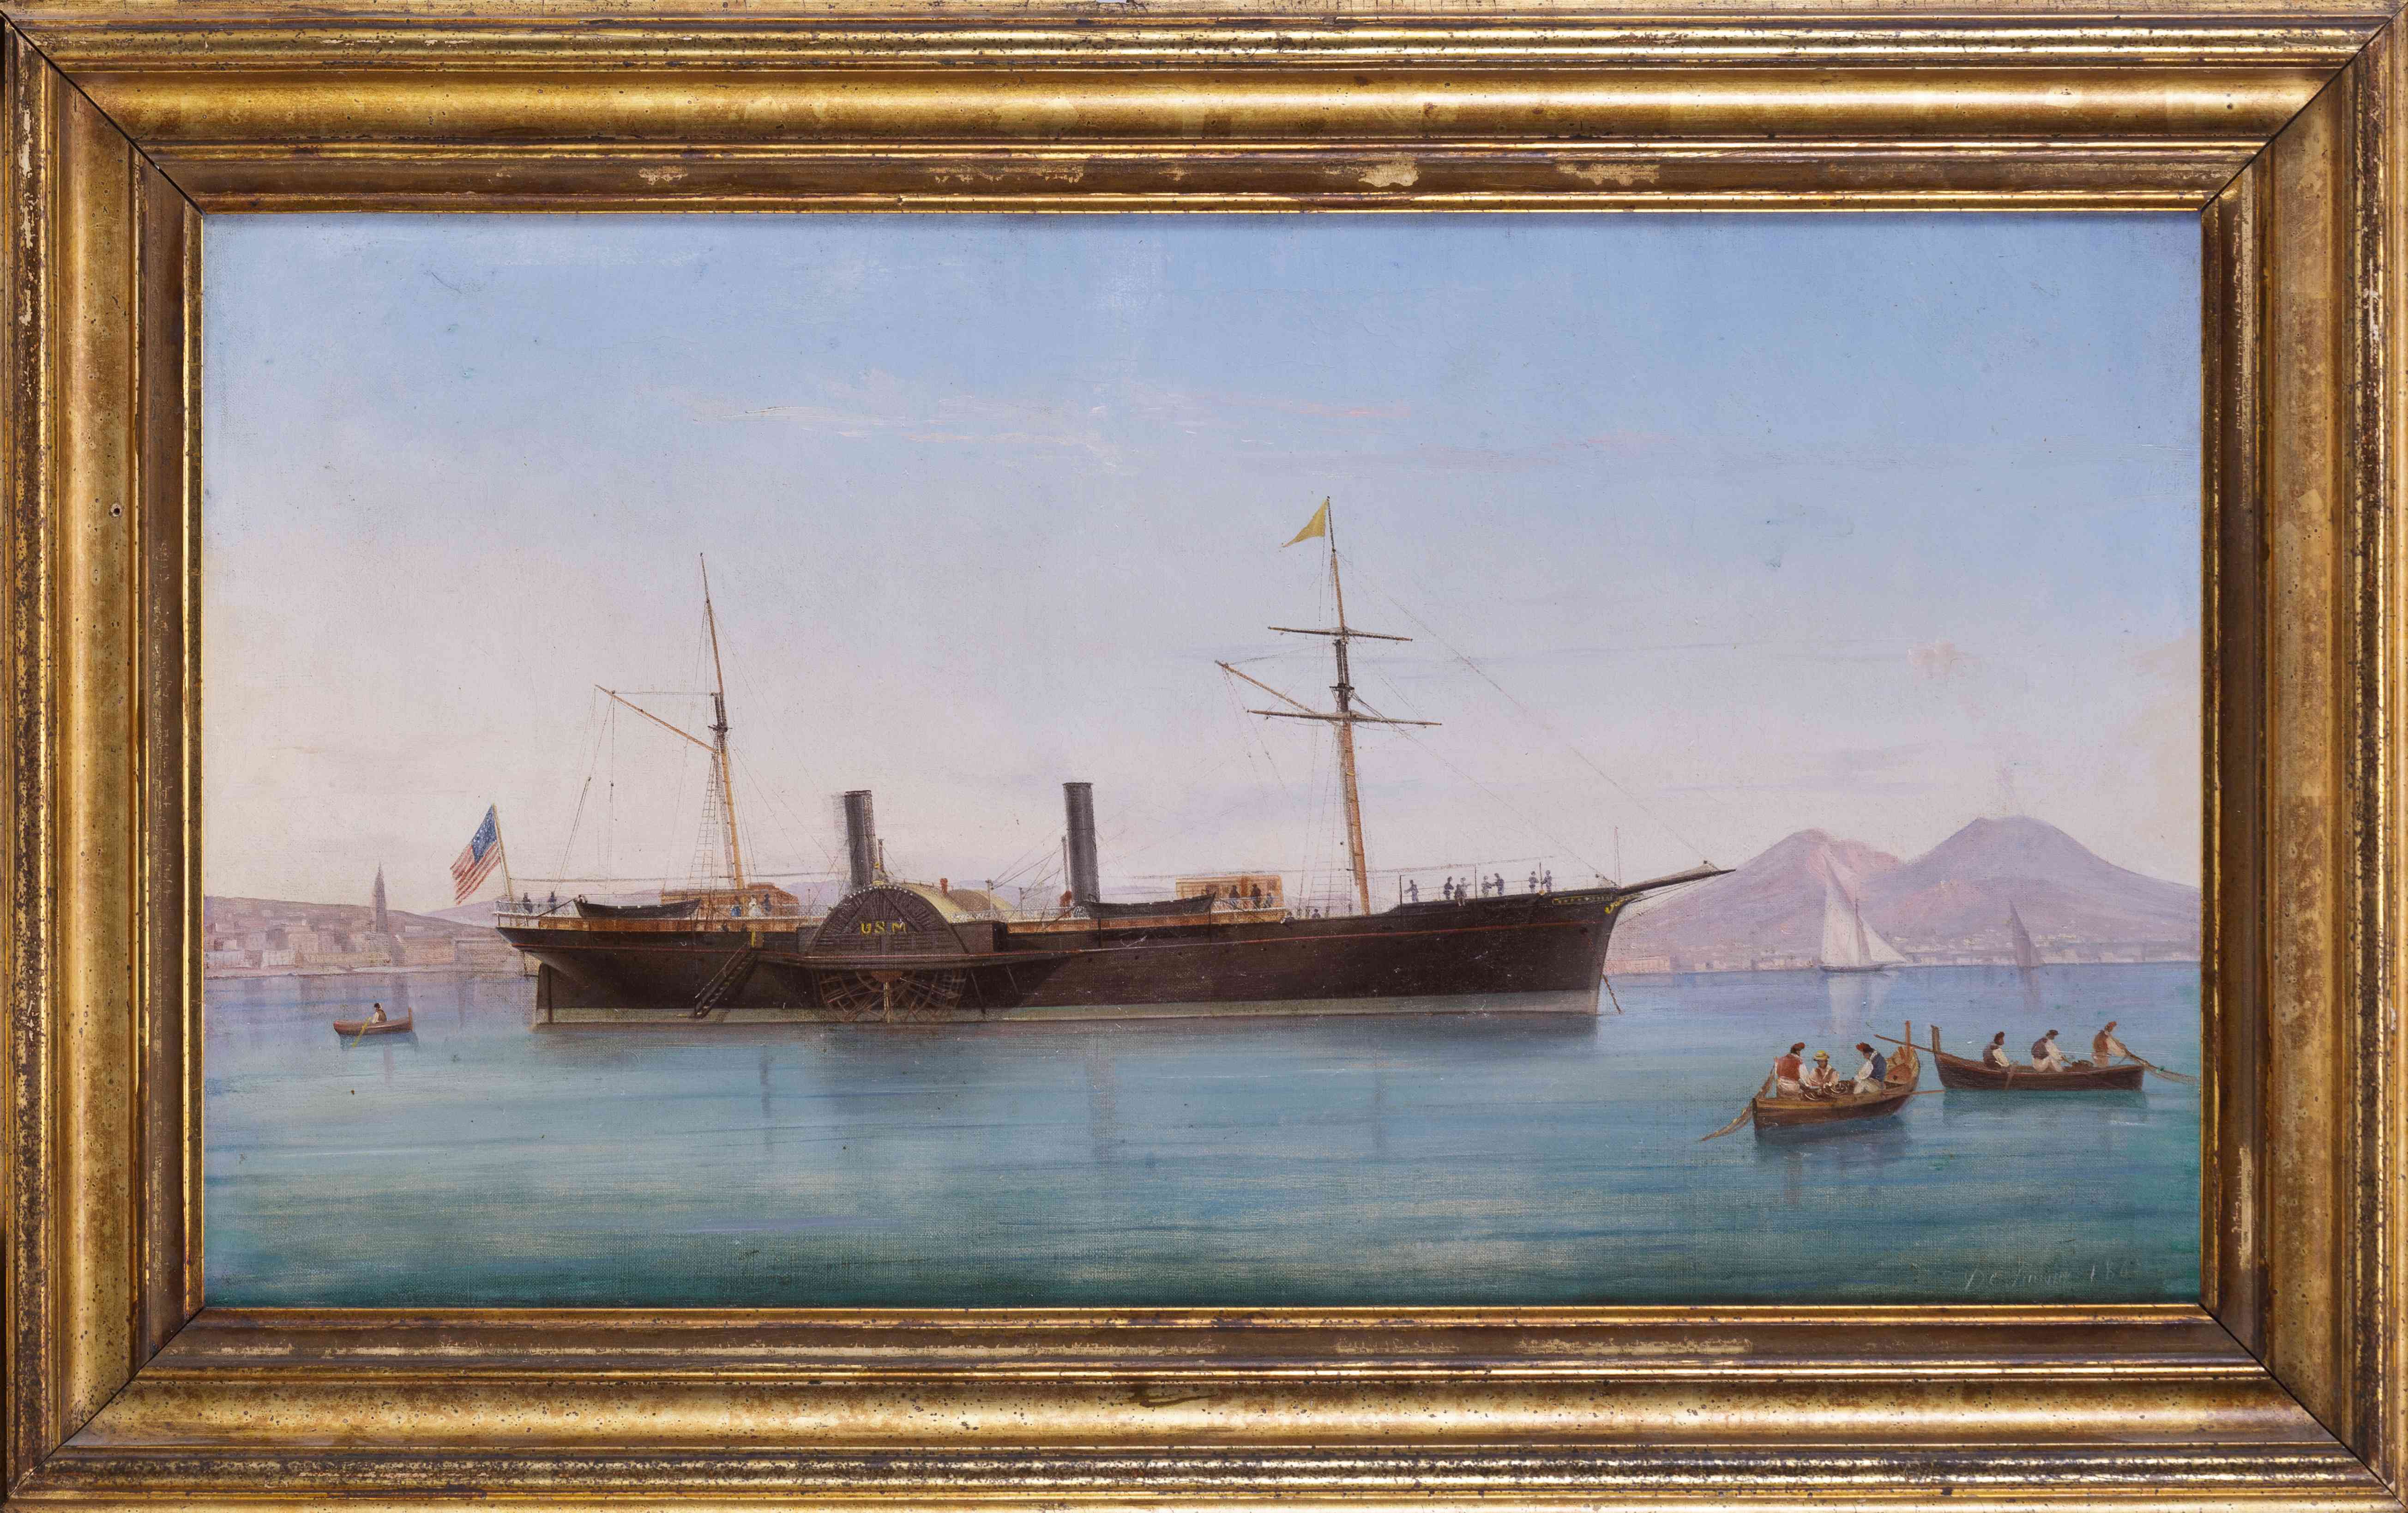 Original Painting of the Steamship "Quaker City" Moored at Naples on its Excursion to the Holy Land